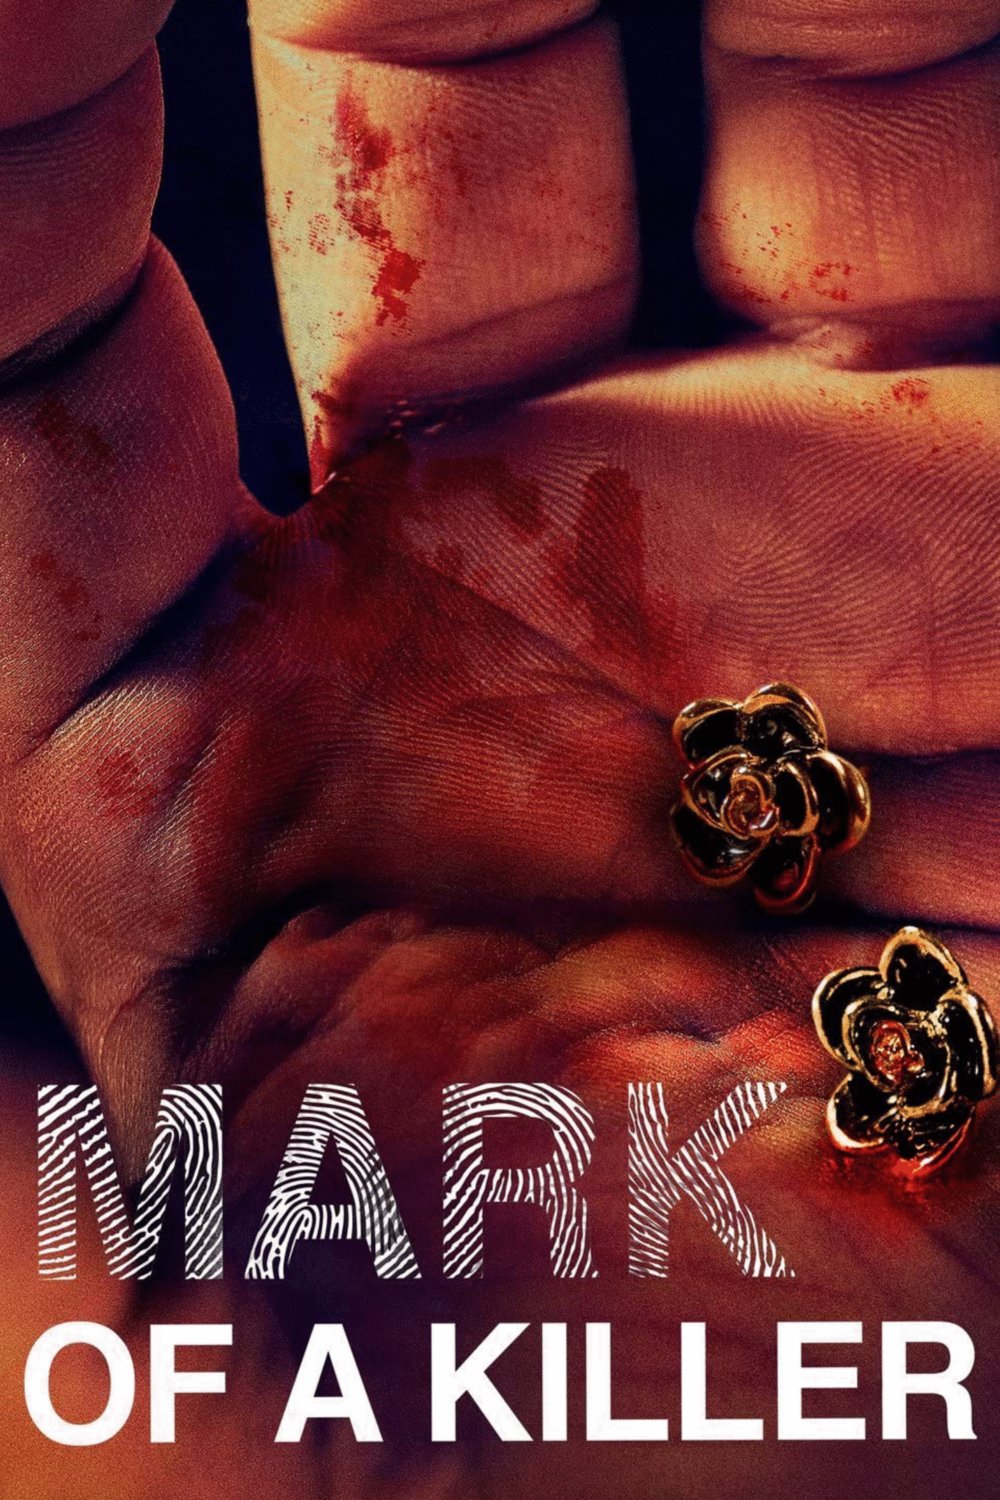 Poster of the movie The Mark of a Killer